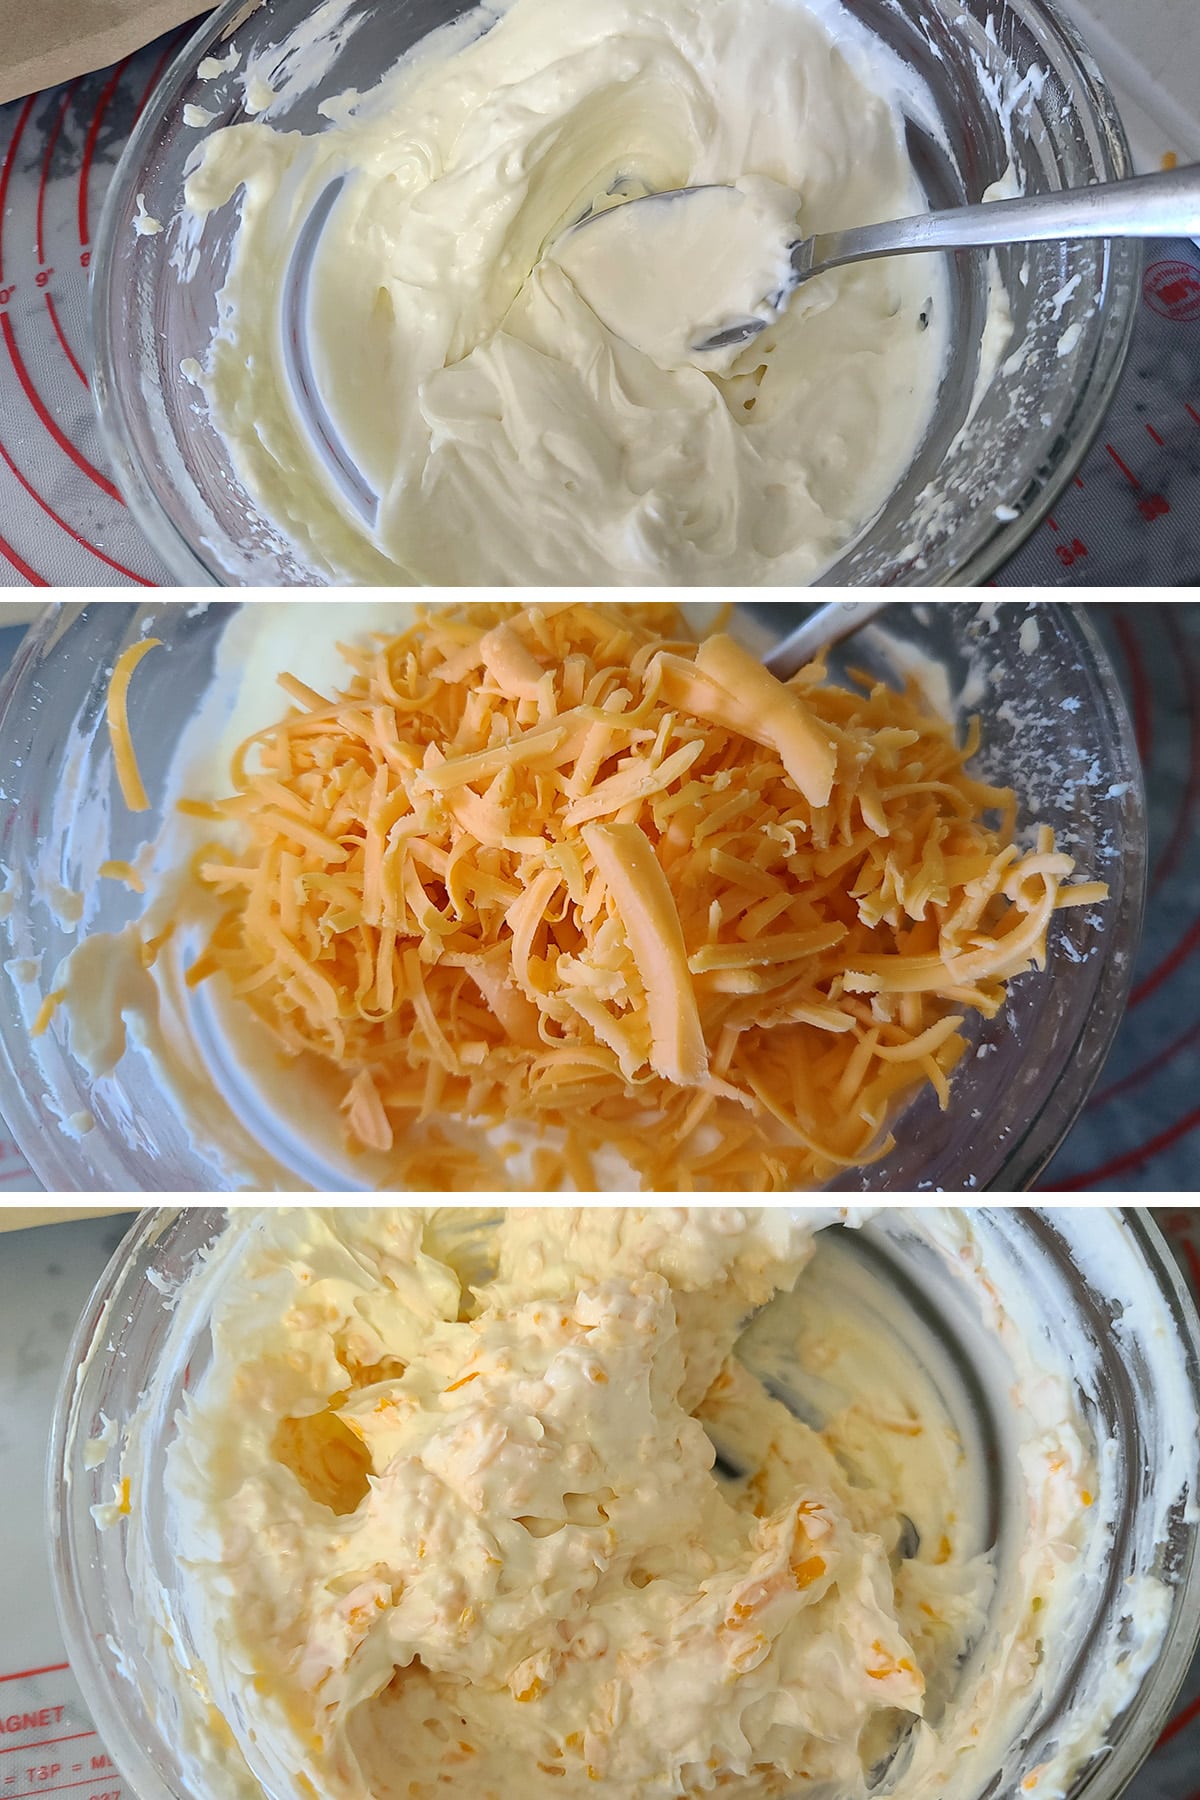 A 3 part image showing the cream cheese and shredded cheddar being mixed into jalapeno popper filling.